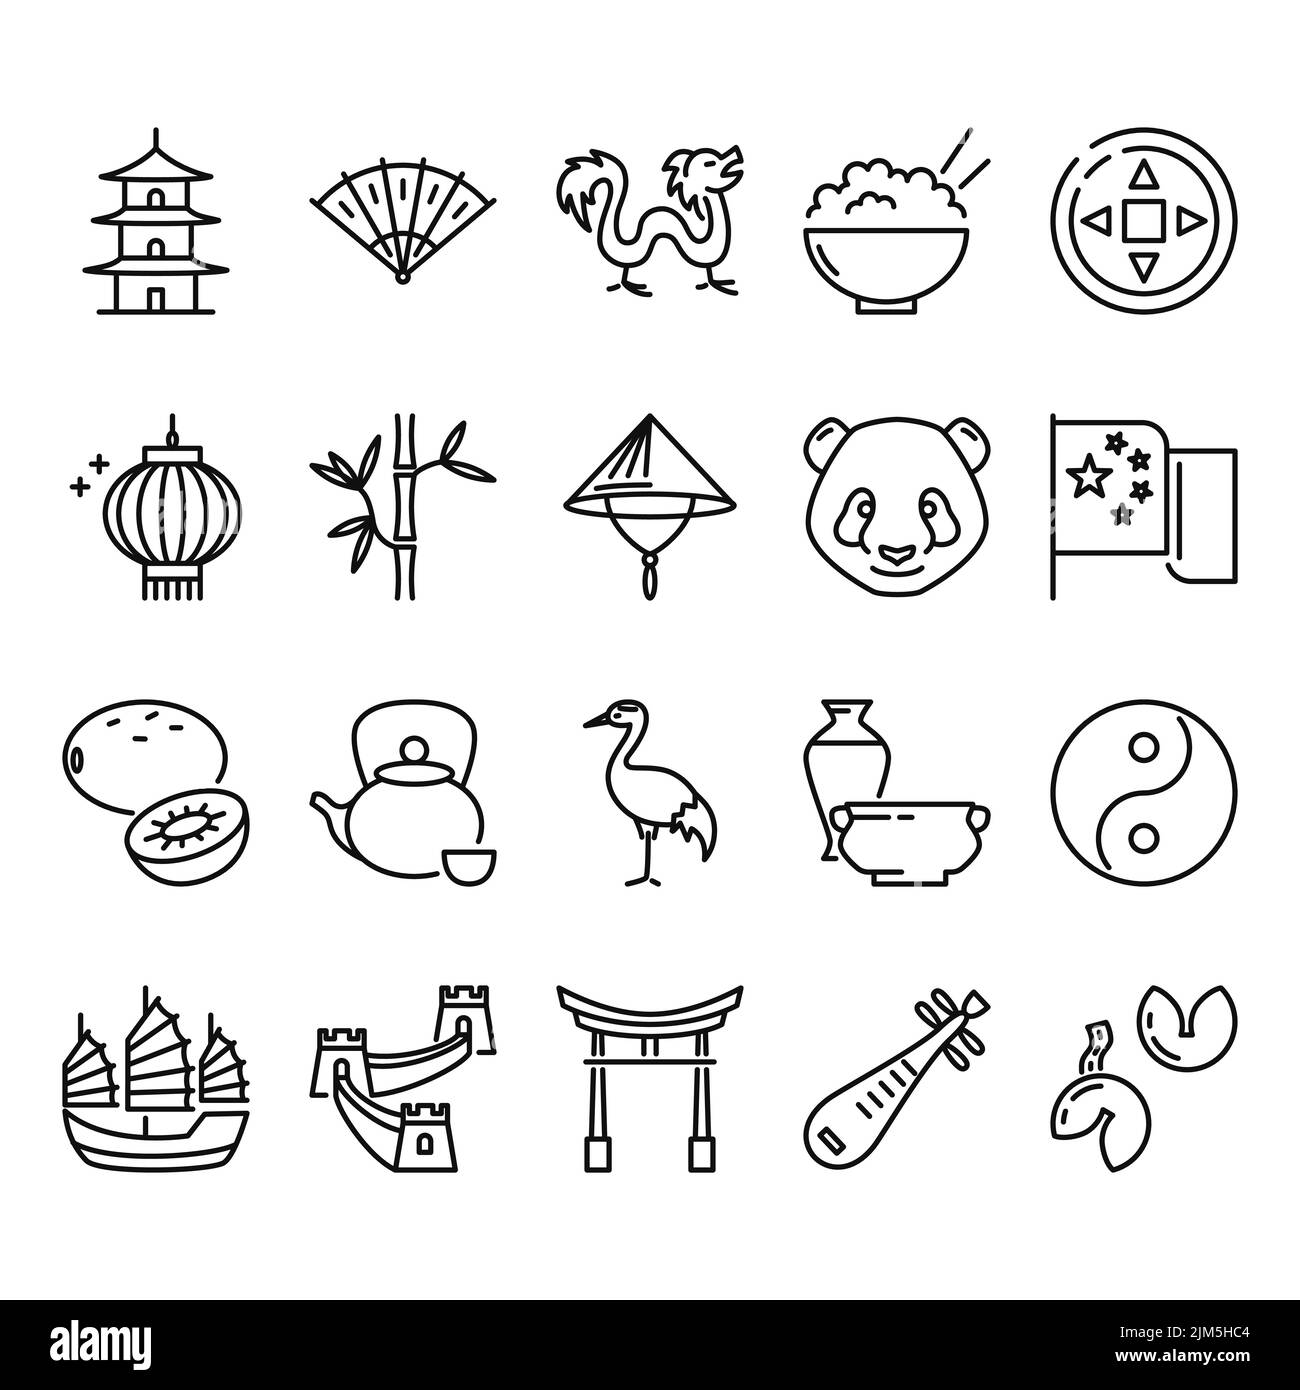 China icon set in line style. Chinese traditional symbols. Vector illustration. Stock Vector